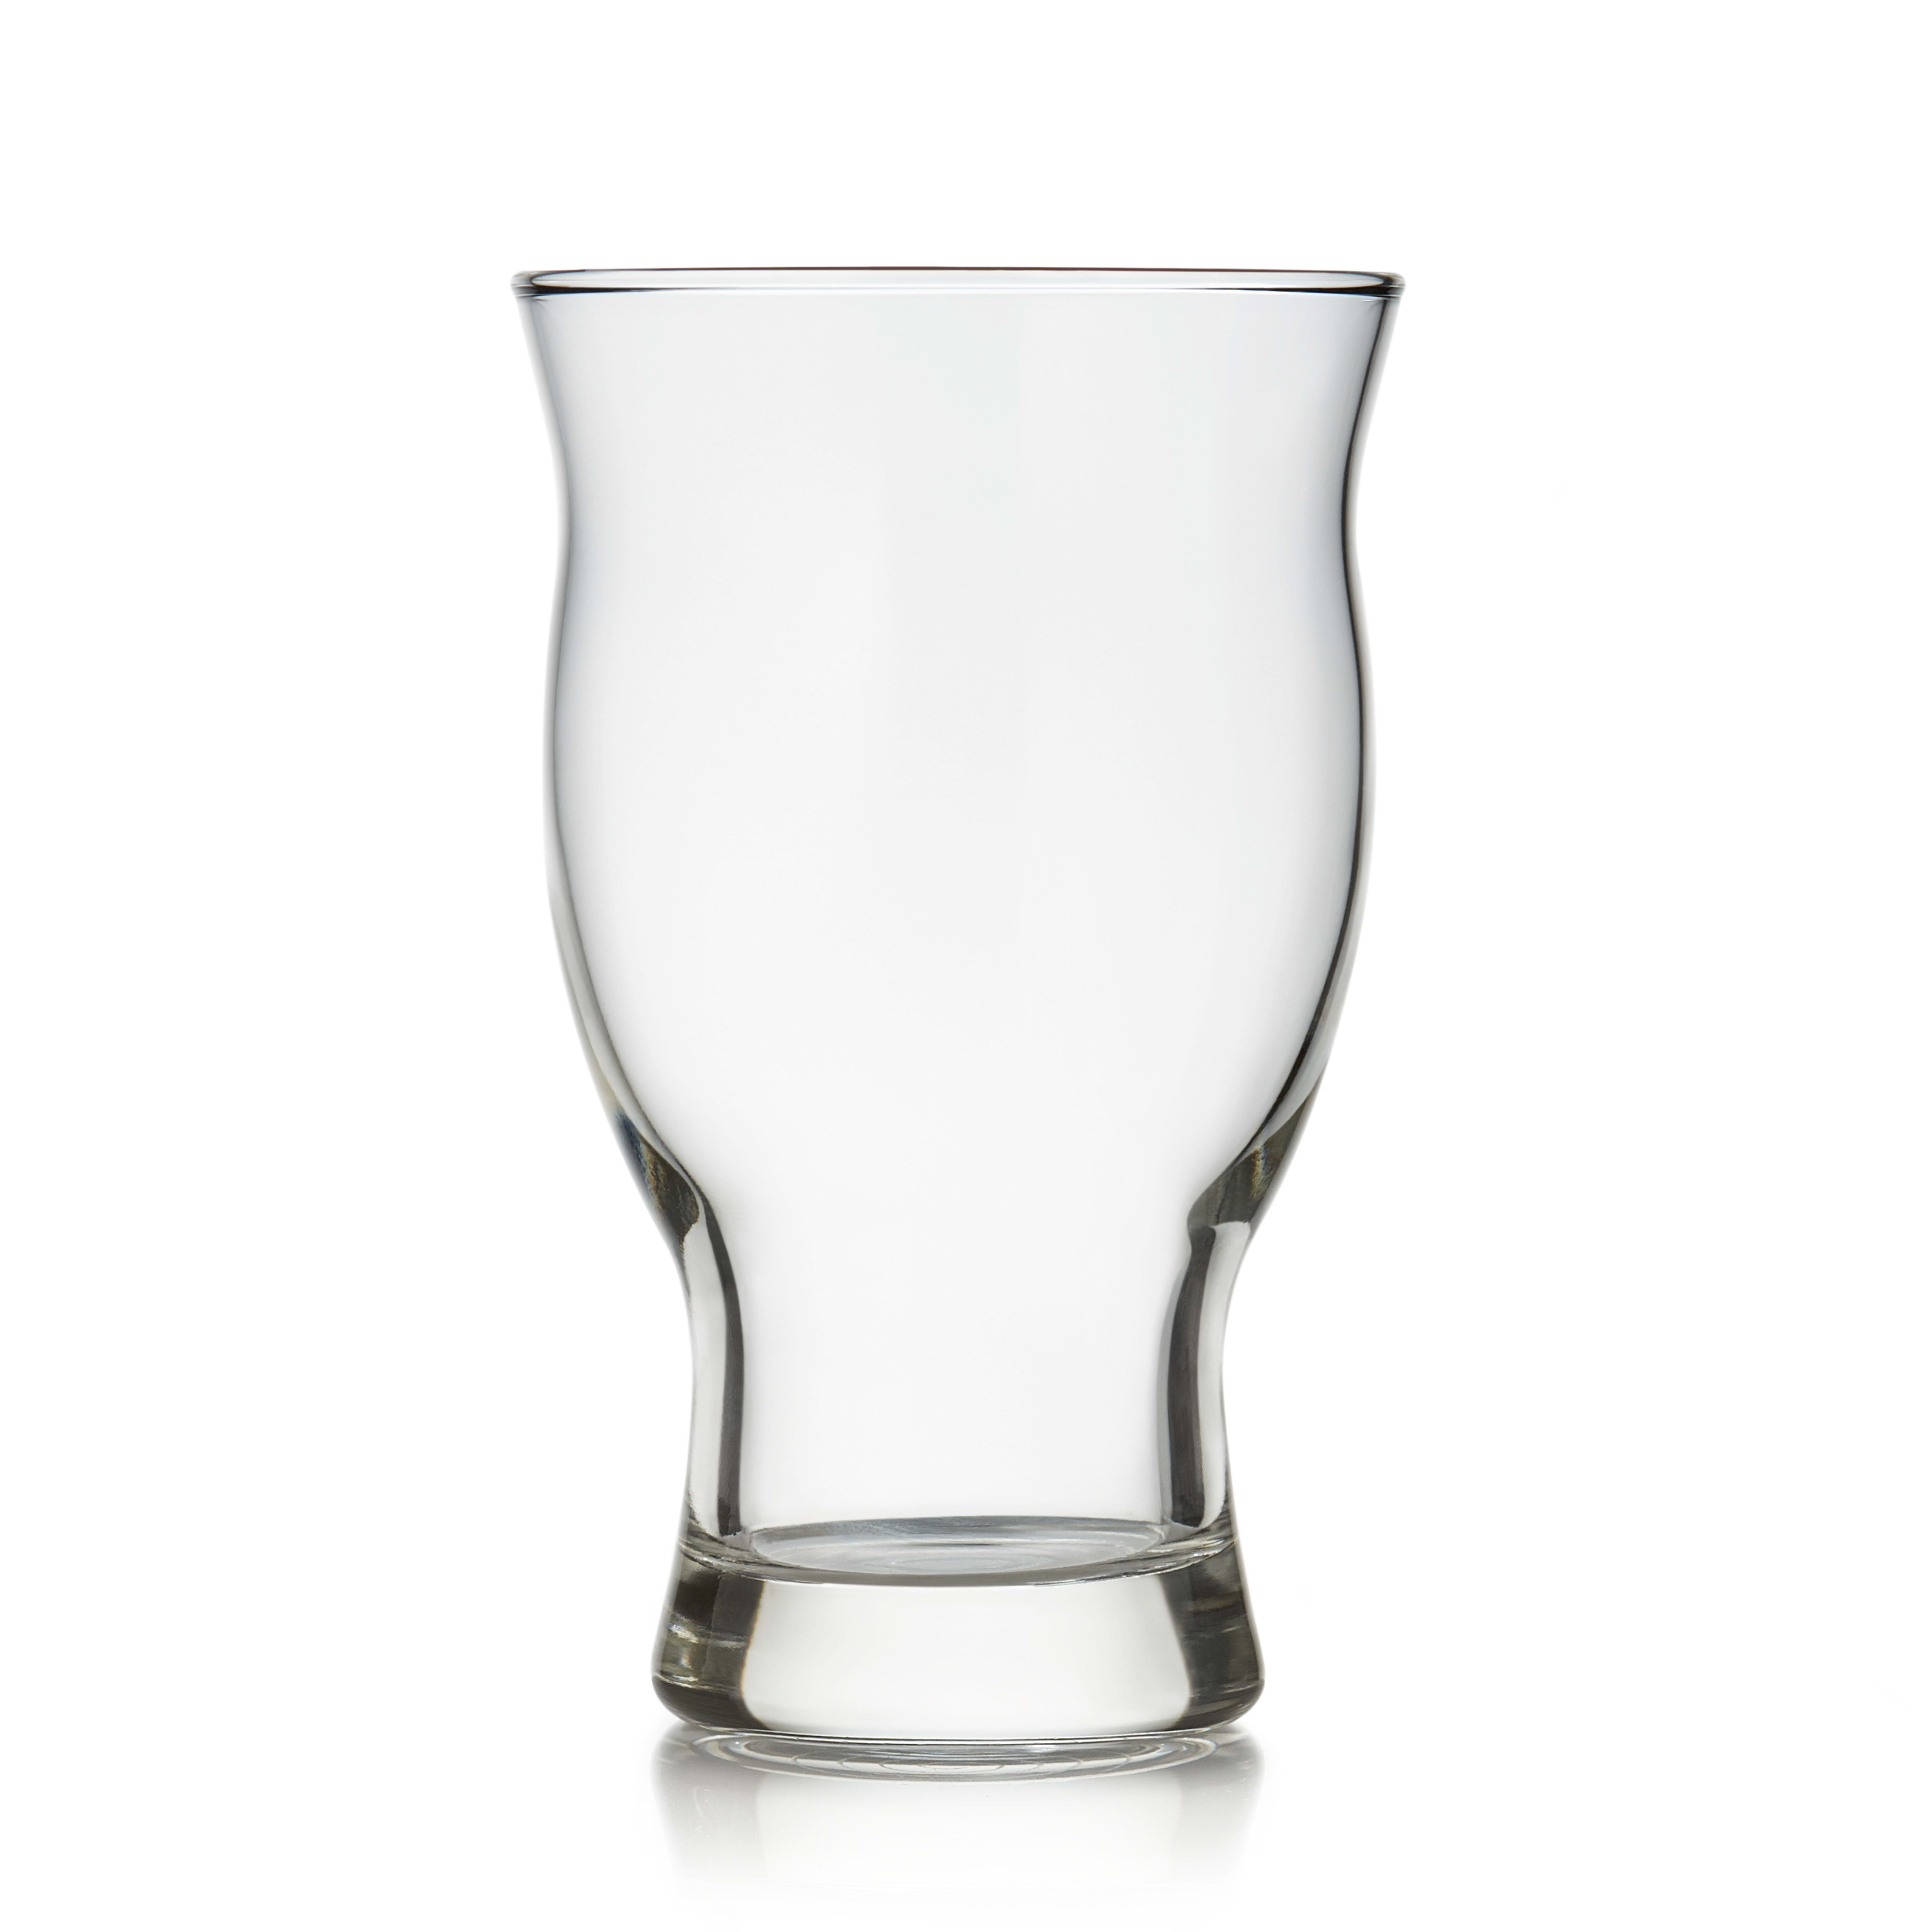 Nucleated Beer Glasses (Why You Probably Need Some) - BrÜcrafter